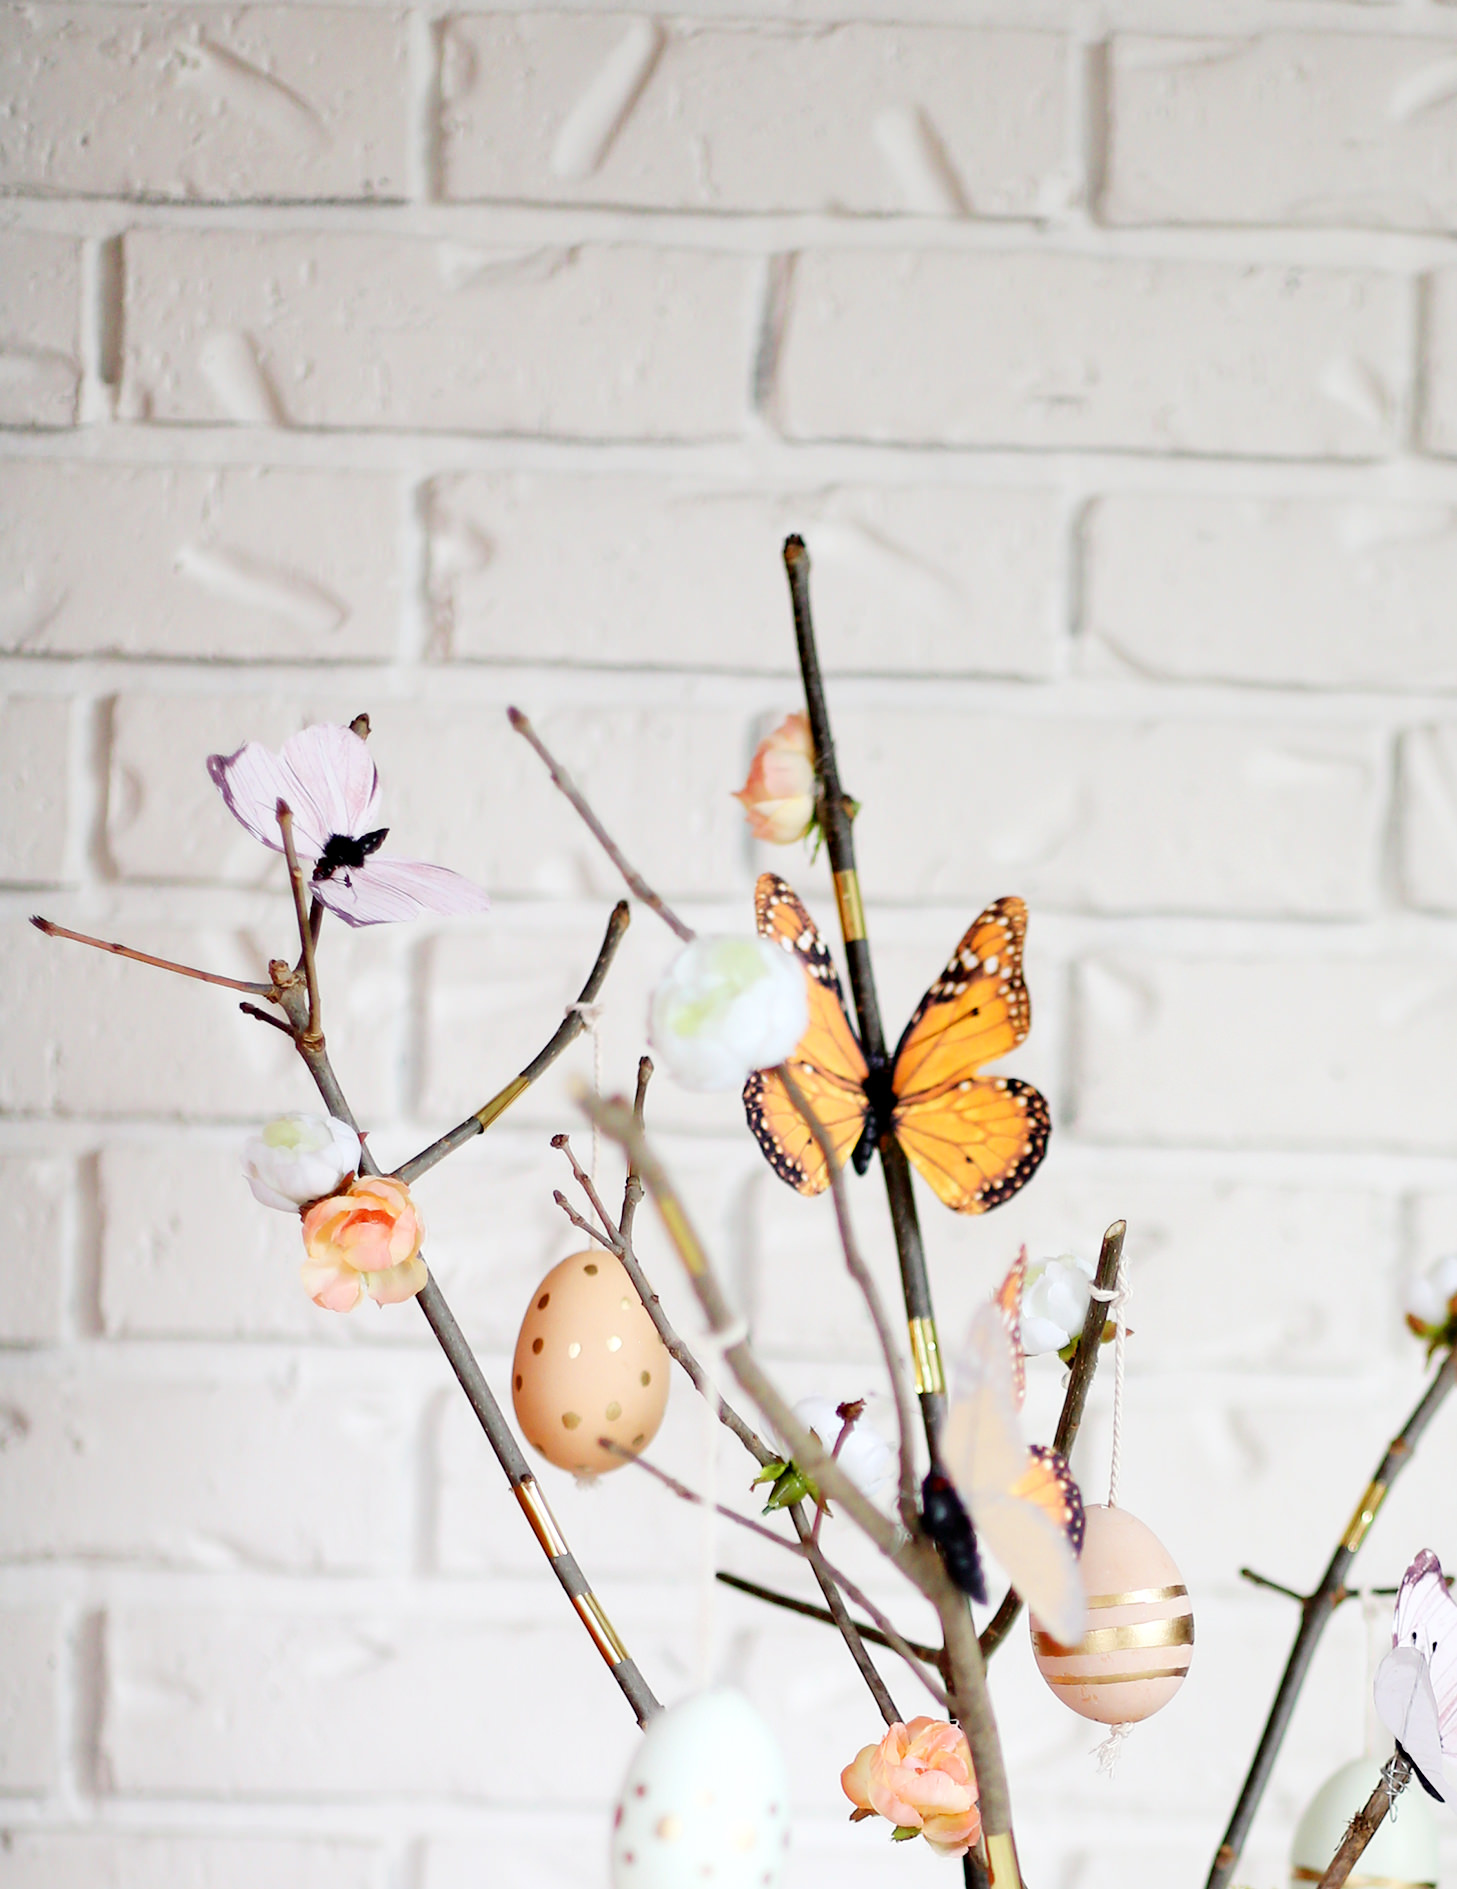 Create a new Spring centerpiece! This modern Easter tree puts an organic spin on the old classic!